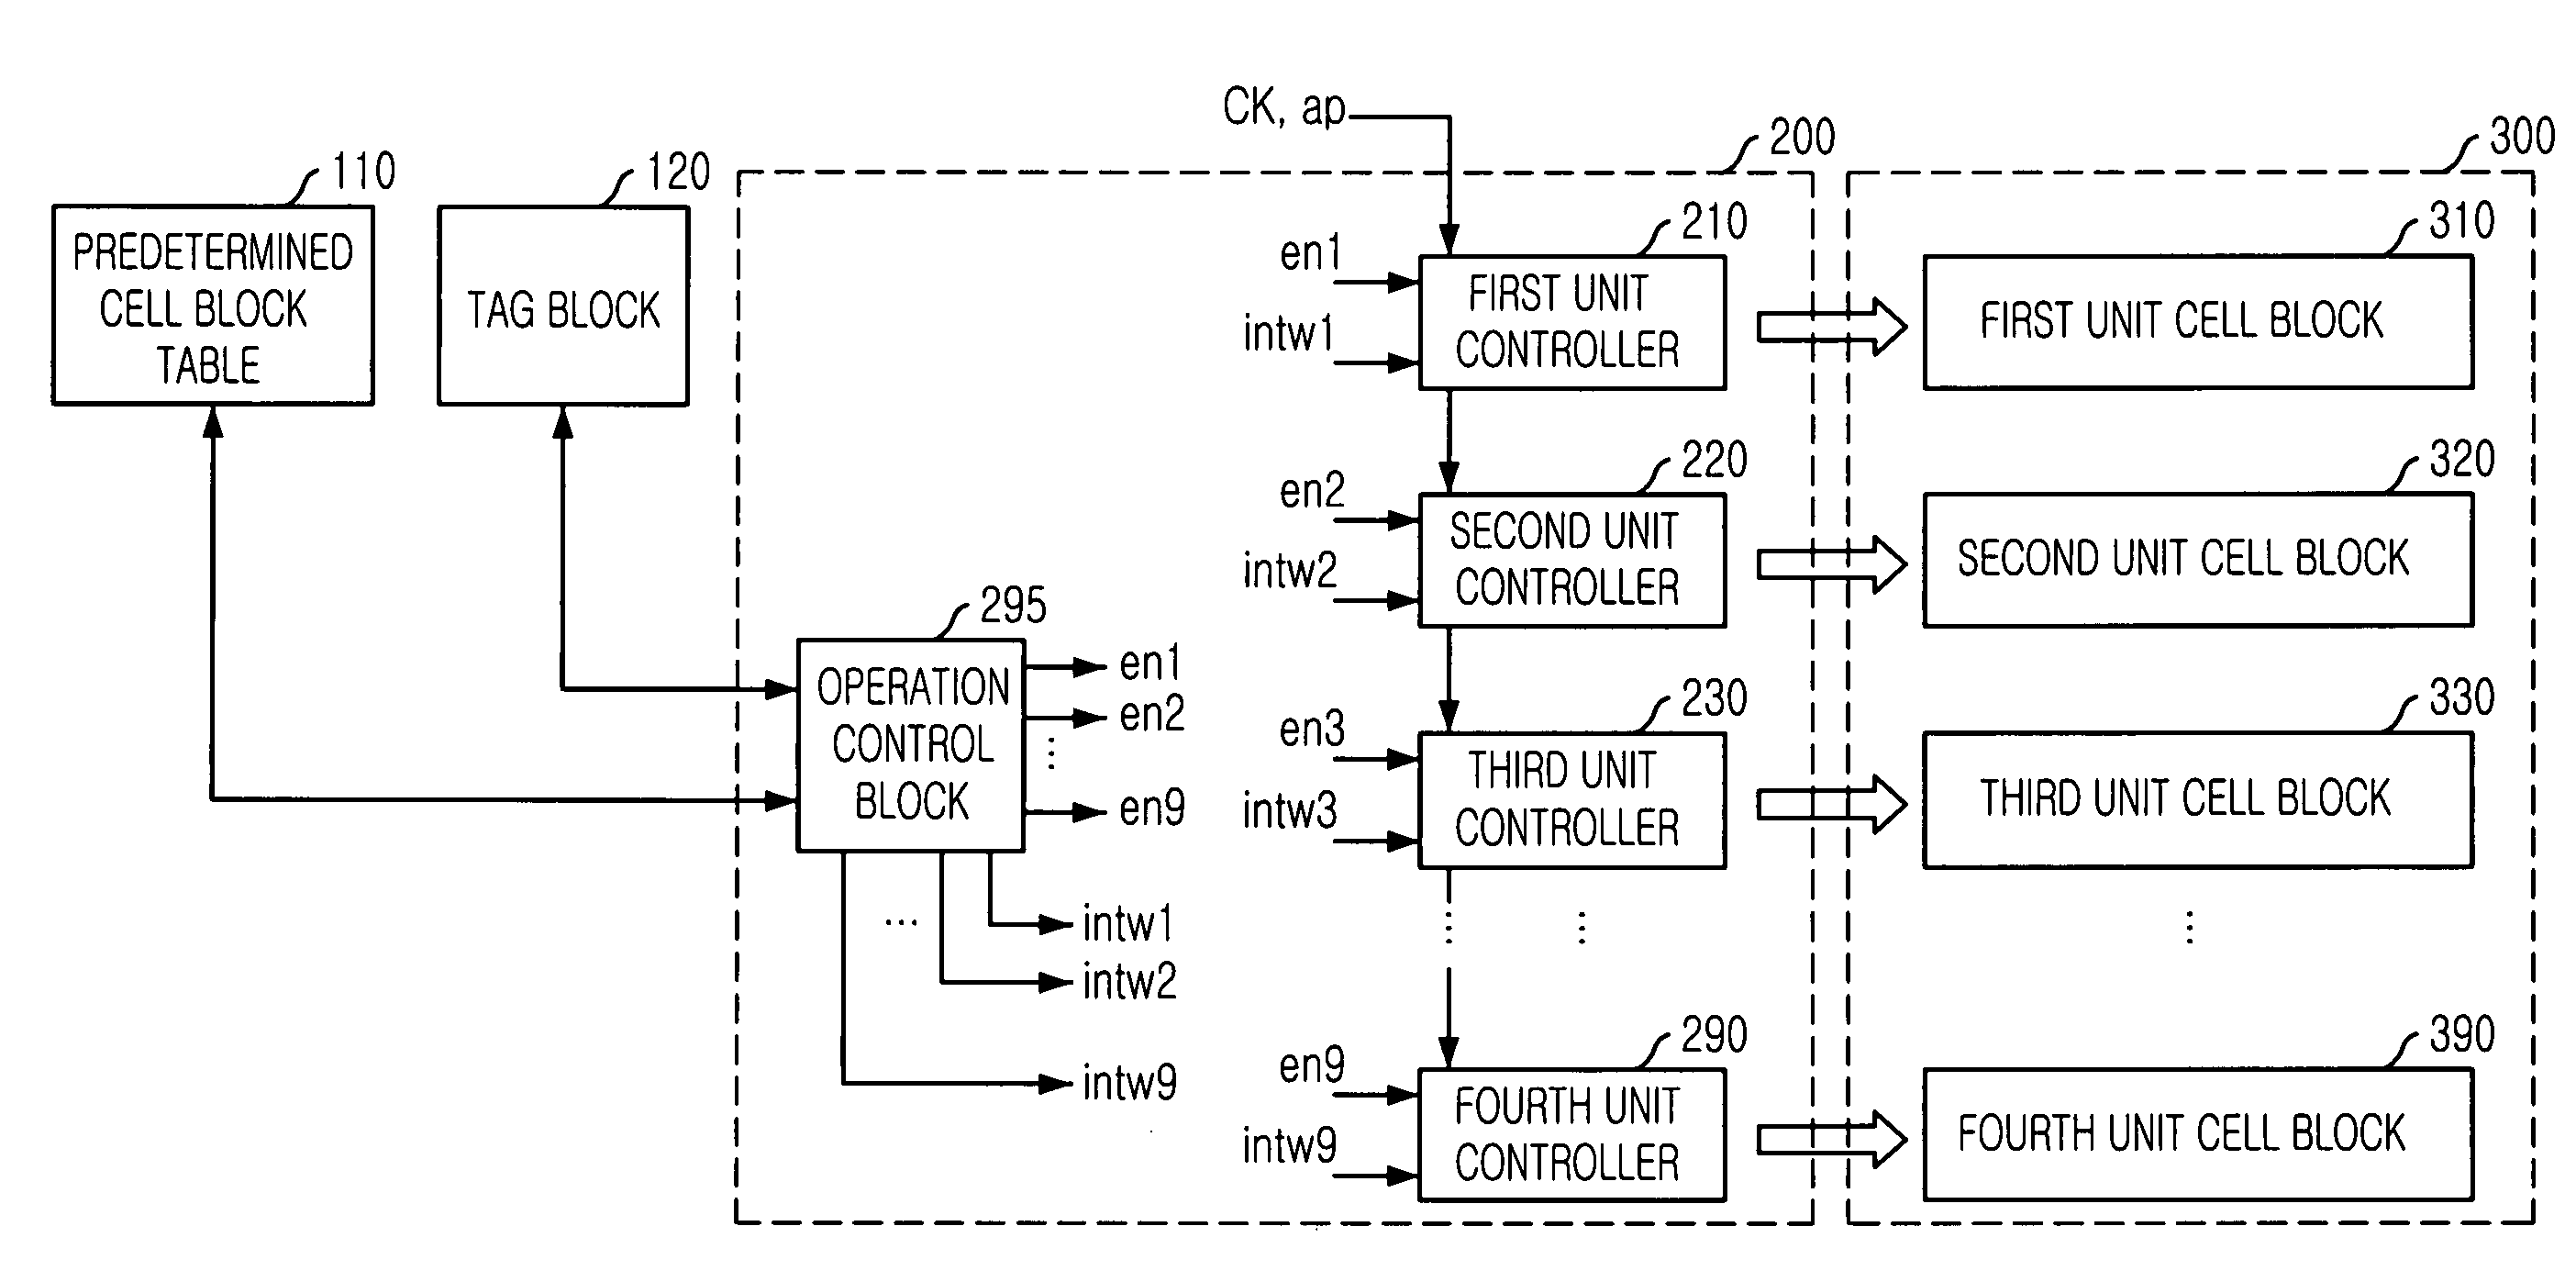 Semiconductor memory device for controlling cell block with state machine